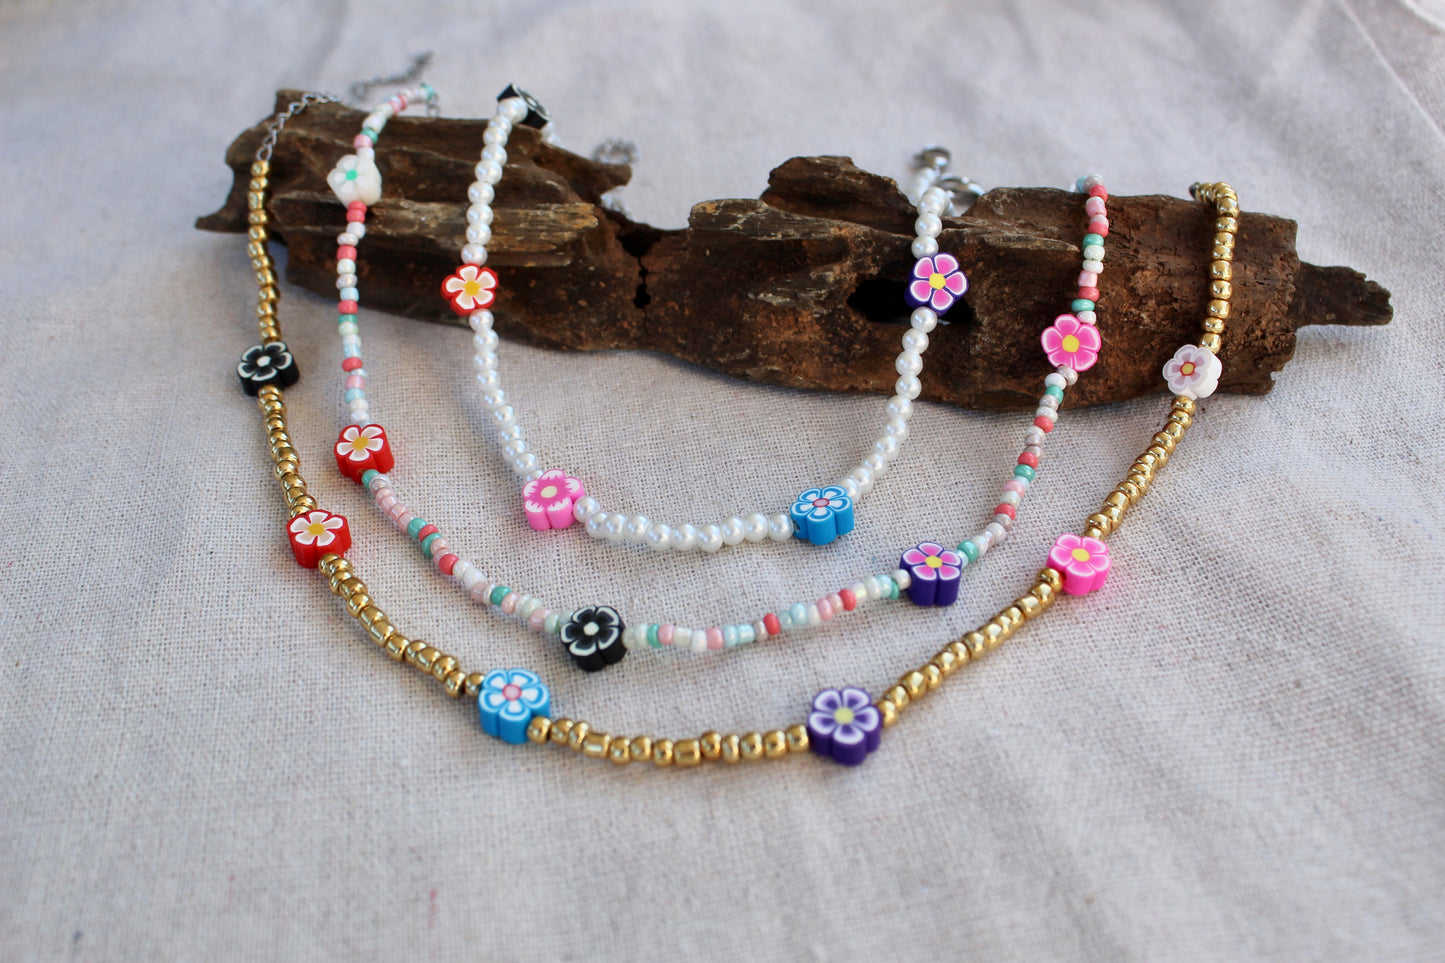 Beaded flower necklace